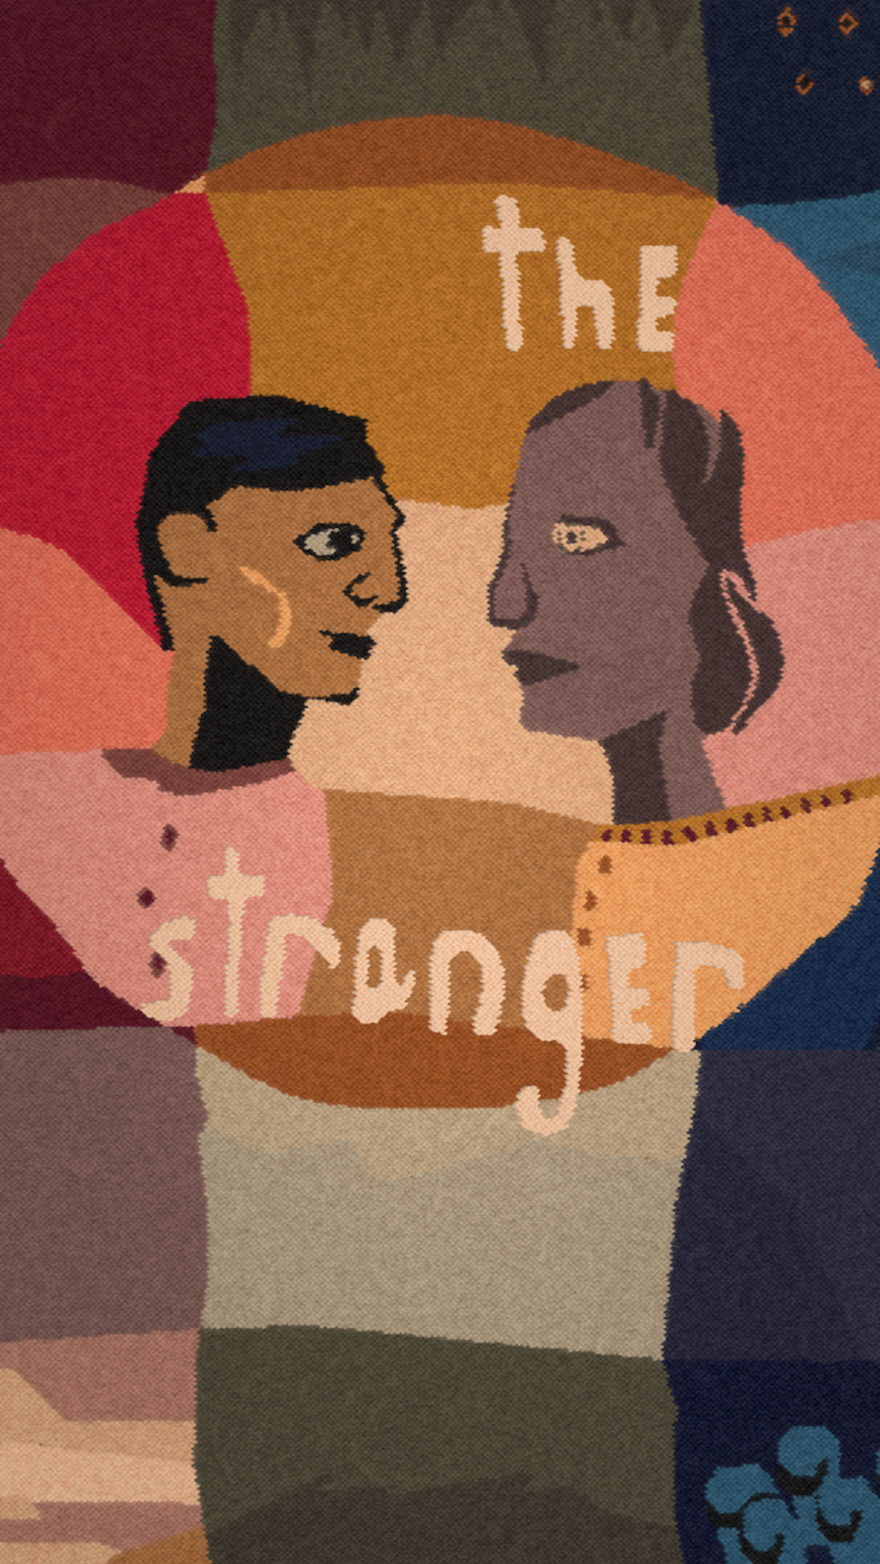 A patchwork-style image of two people and writing: The Stranger